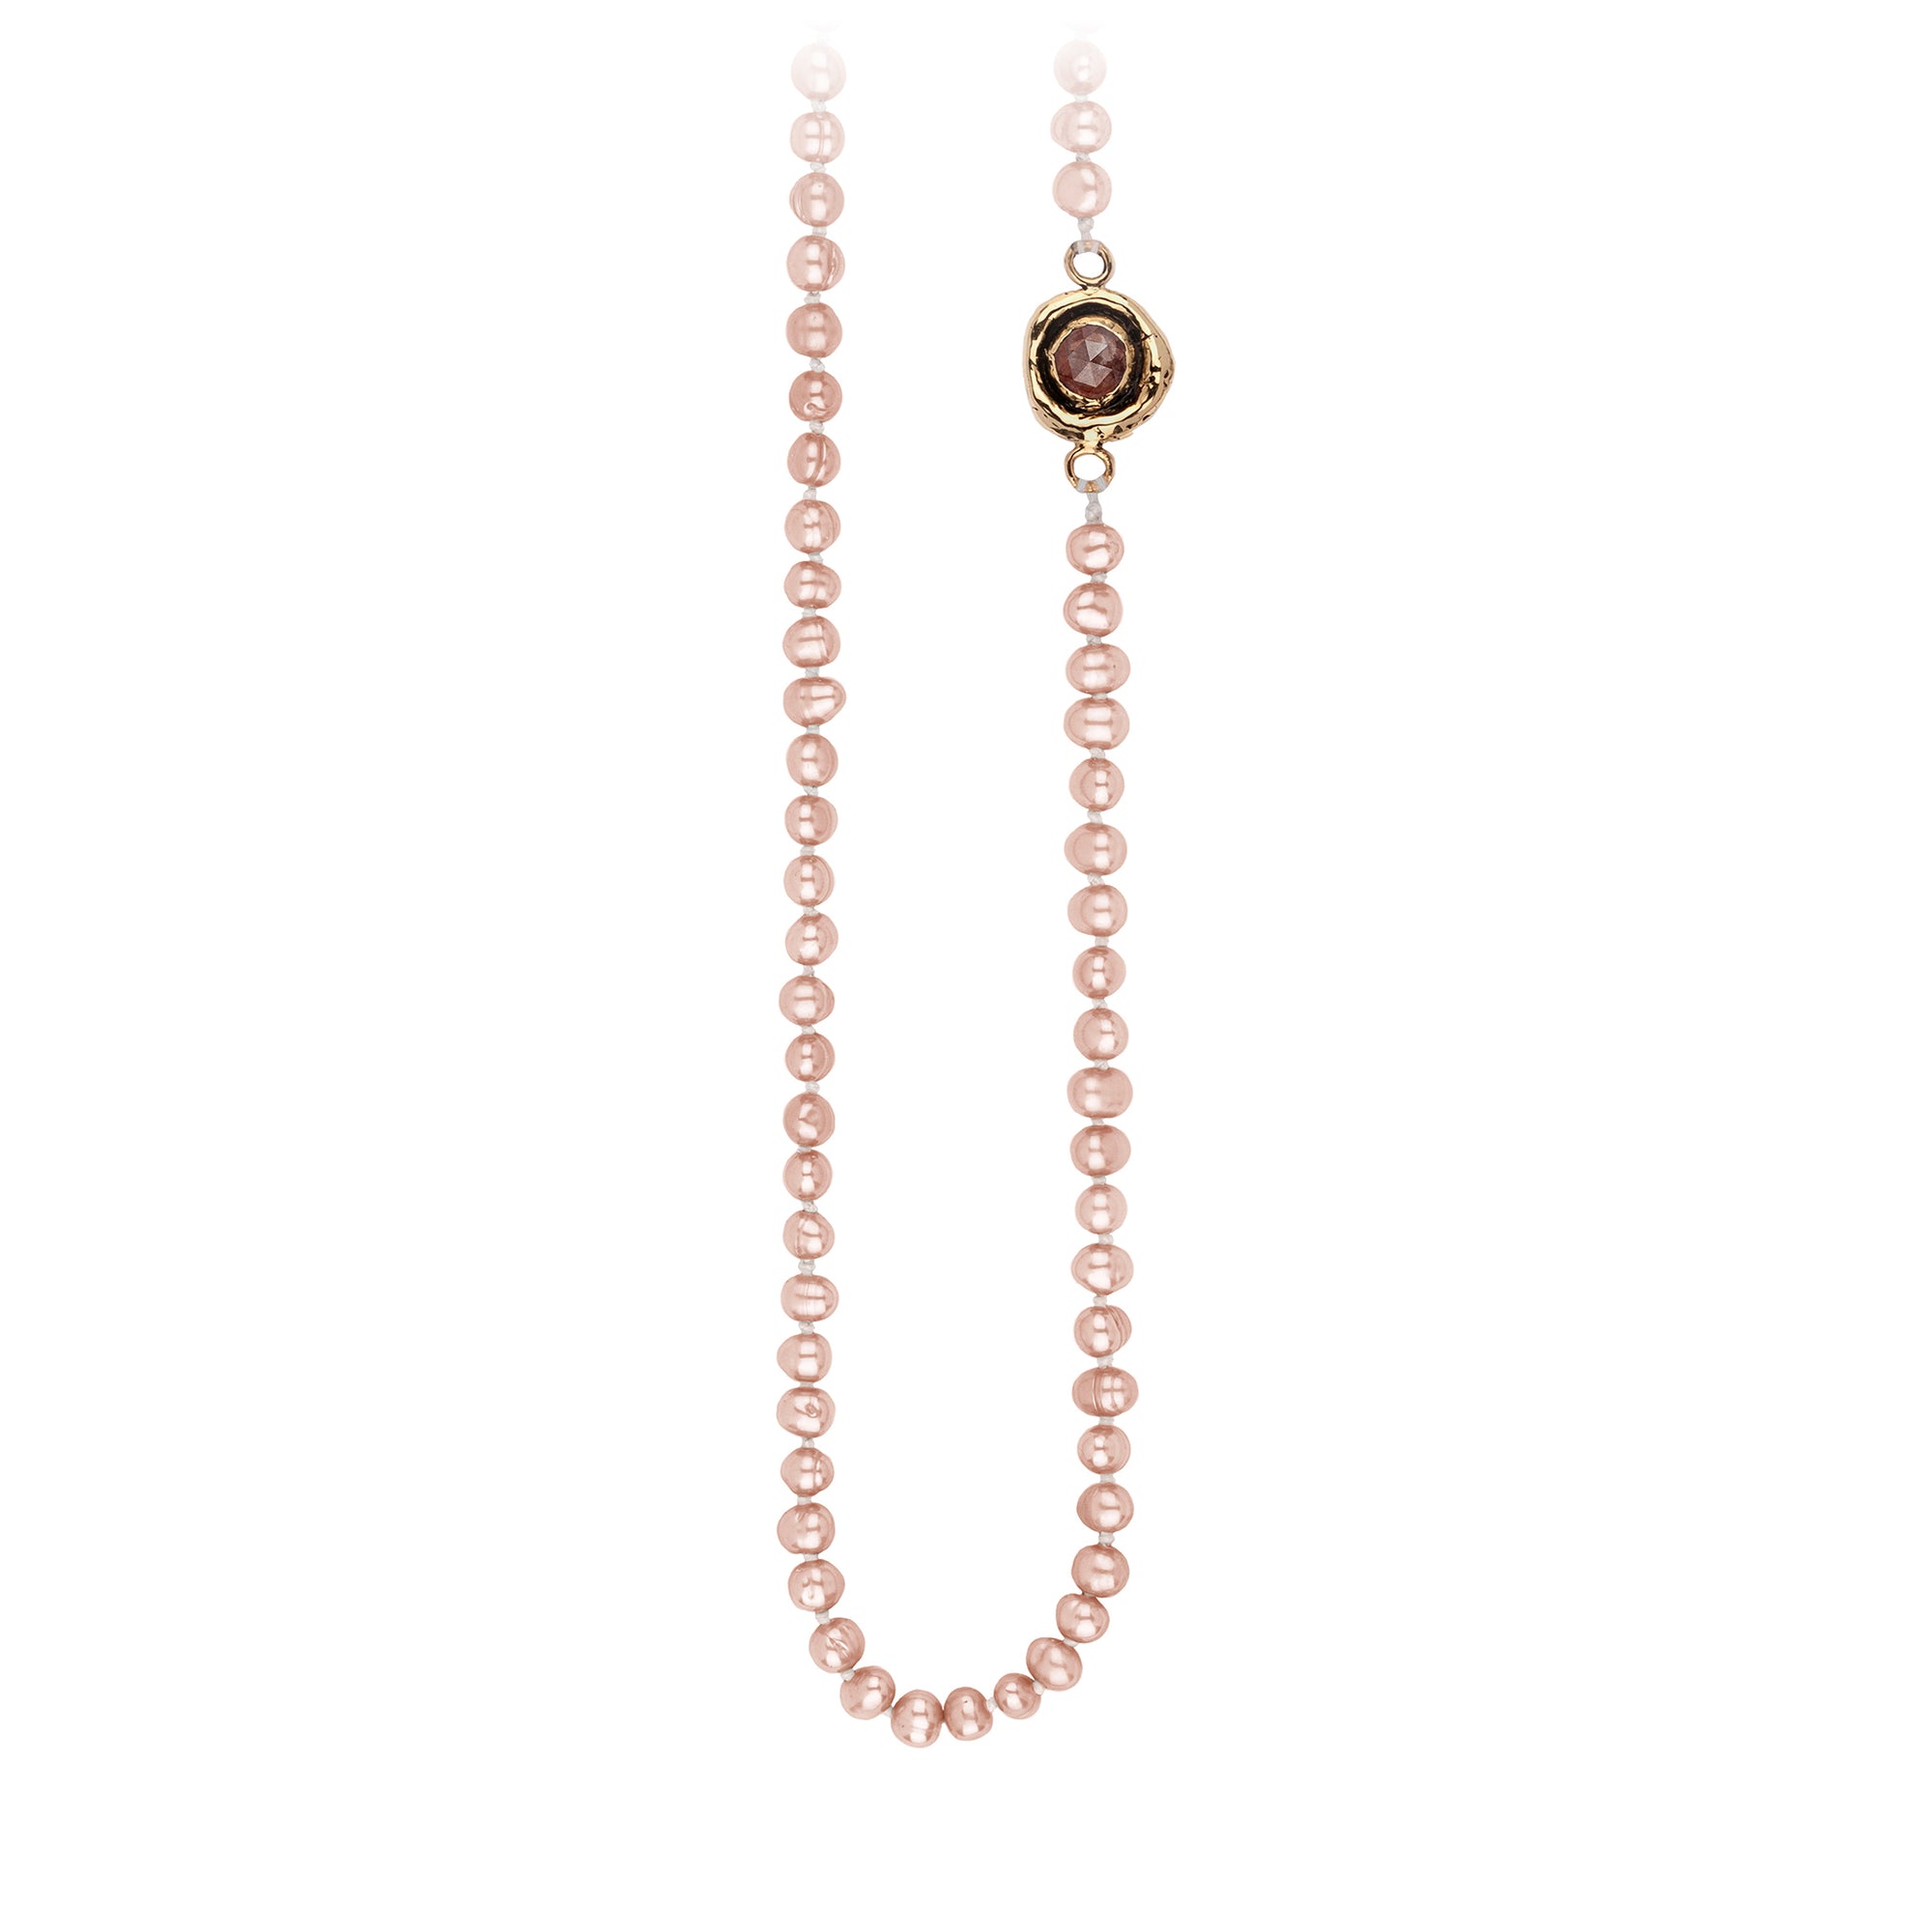 A necklace of hand strung rose pearls with a 14k gold bezel set cognac diamond.